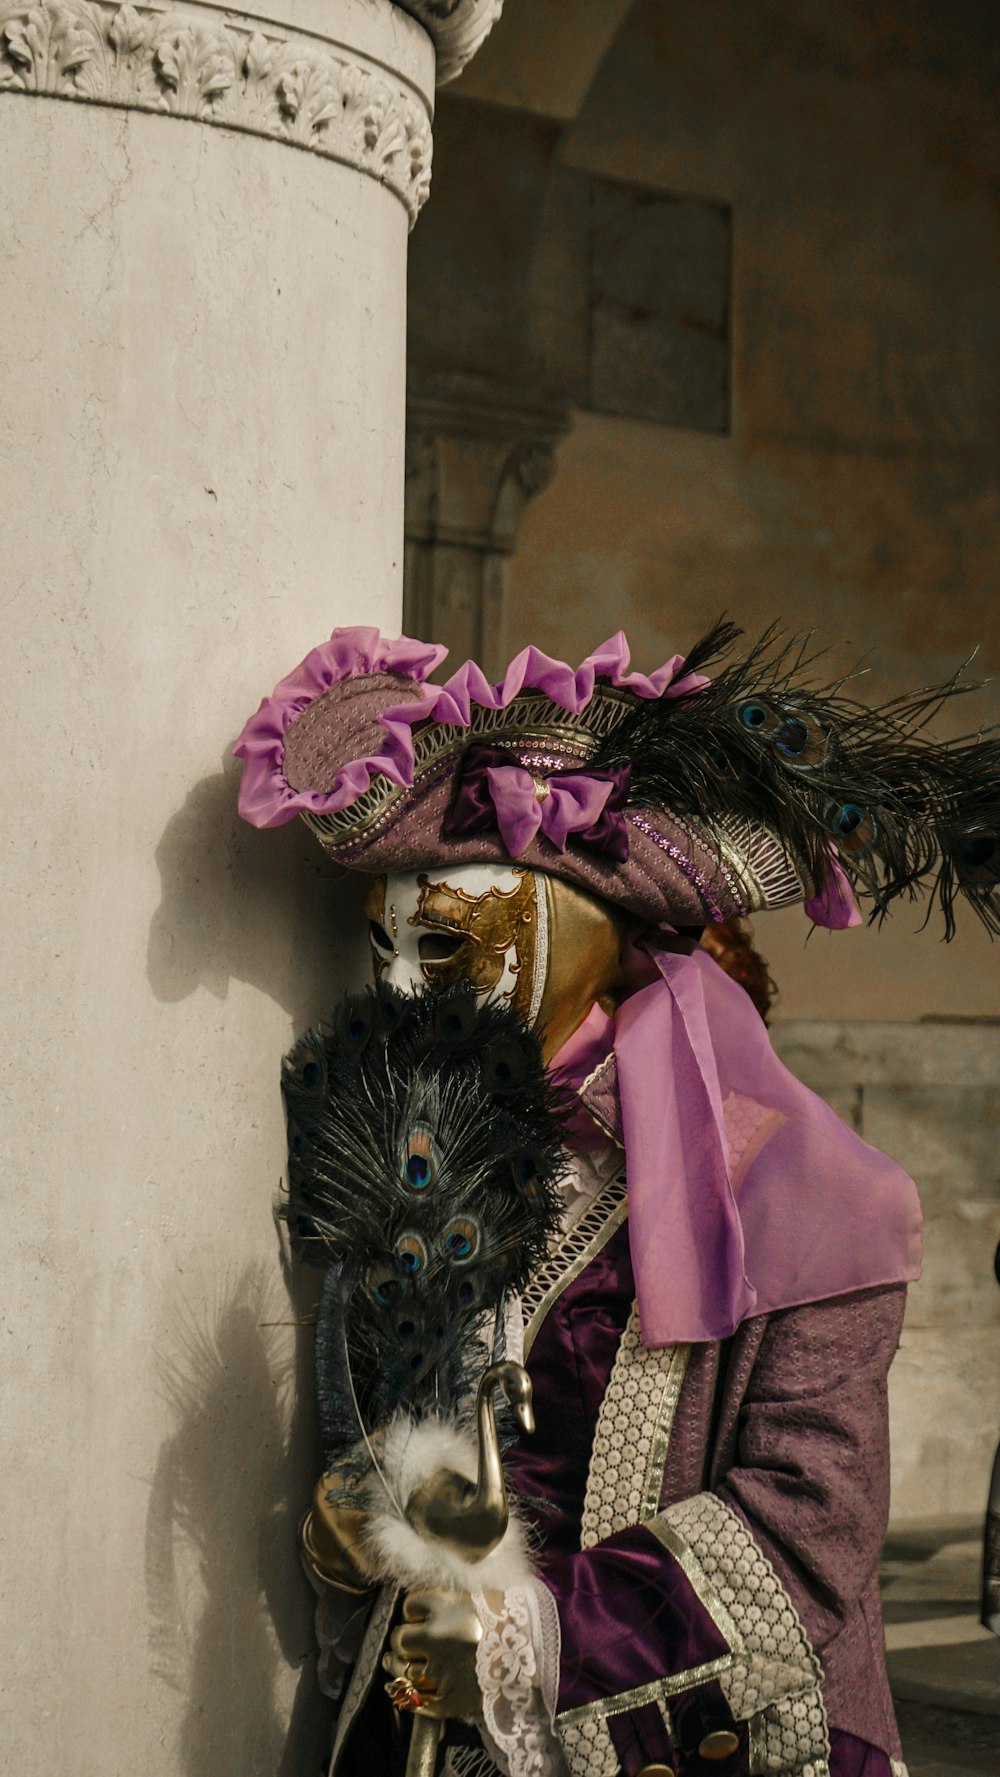 a masked man wearing a purple and black costume